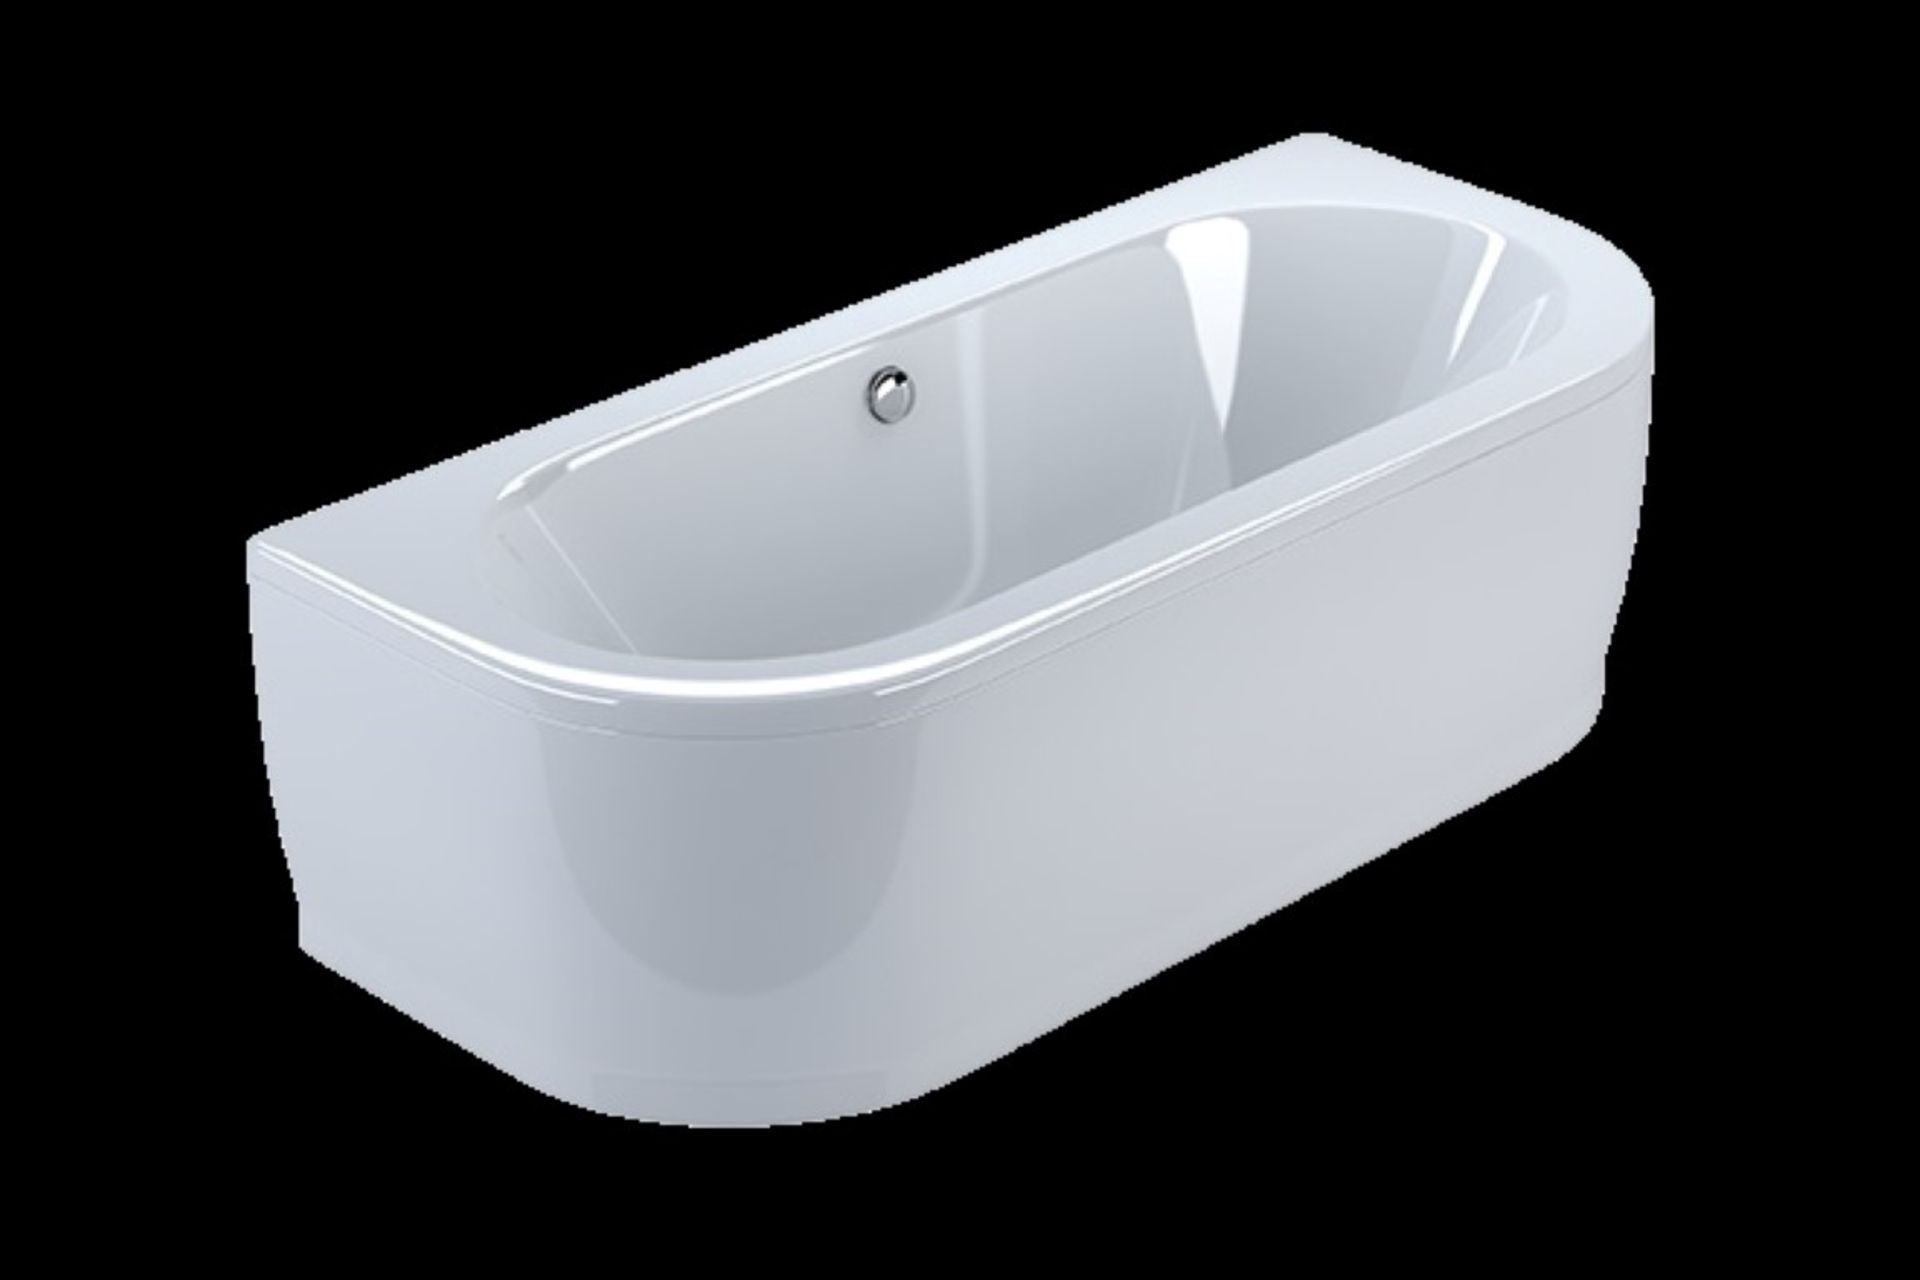 1 x "Palladio" BACK TO WALL BATH - Stylish Curvaceous Design - White Acrylic - 1700 X 750MM - - Image 2 of 9